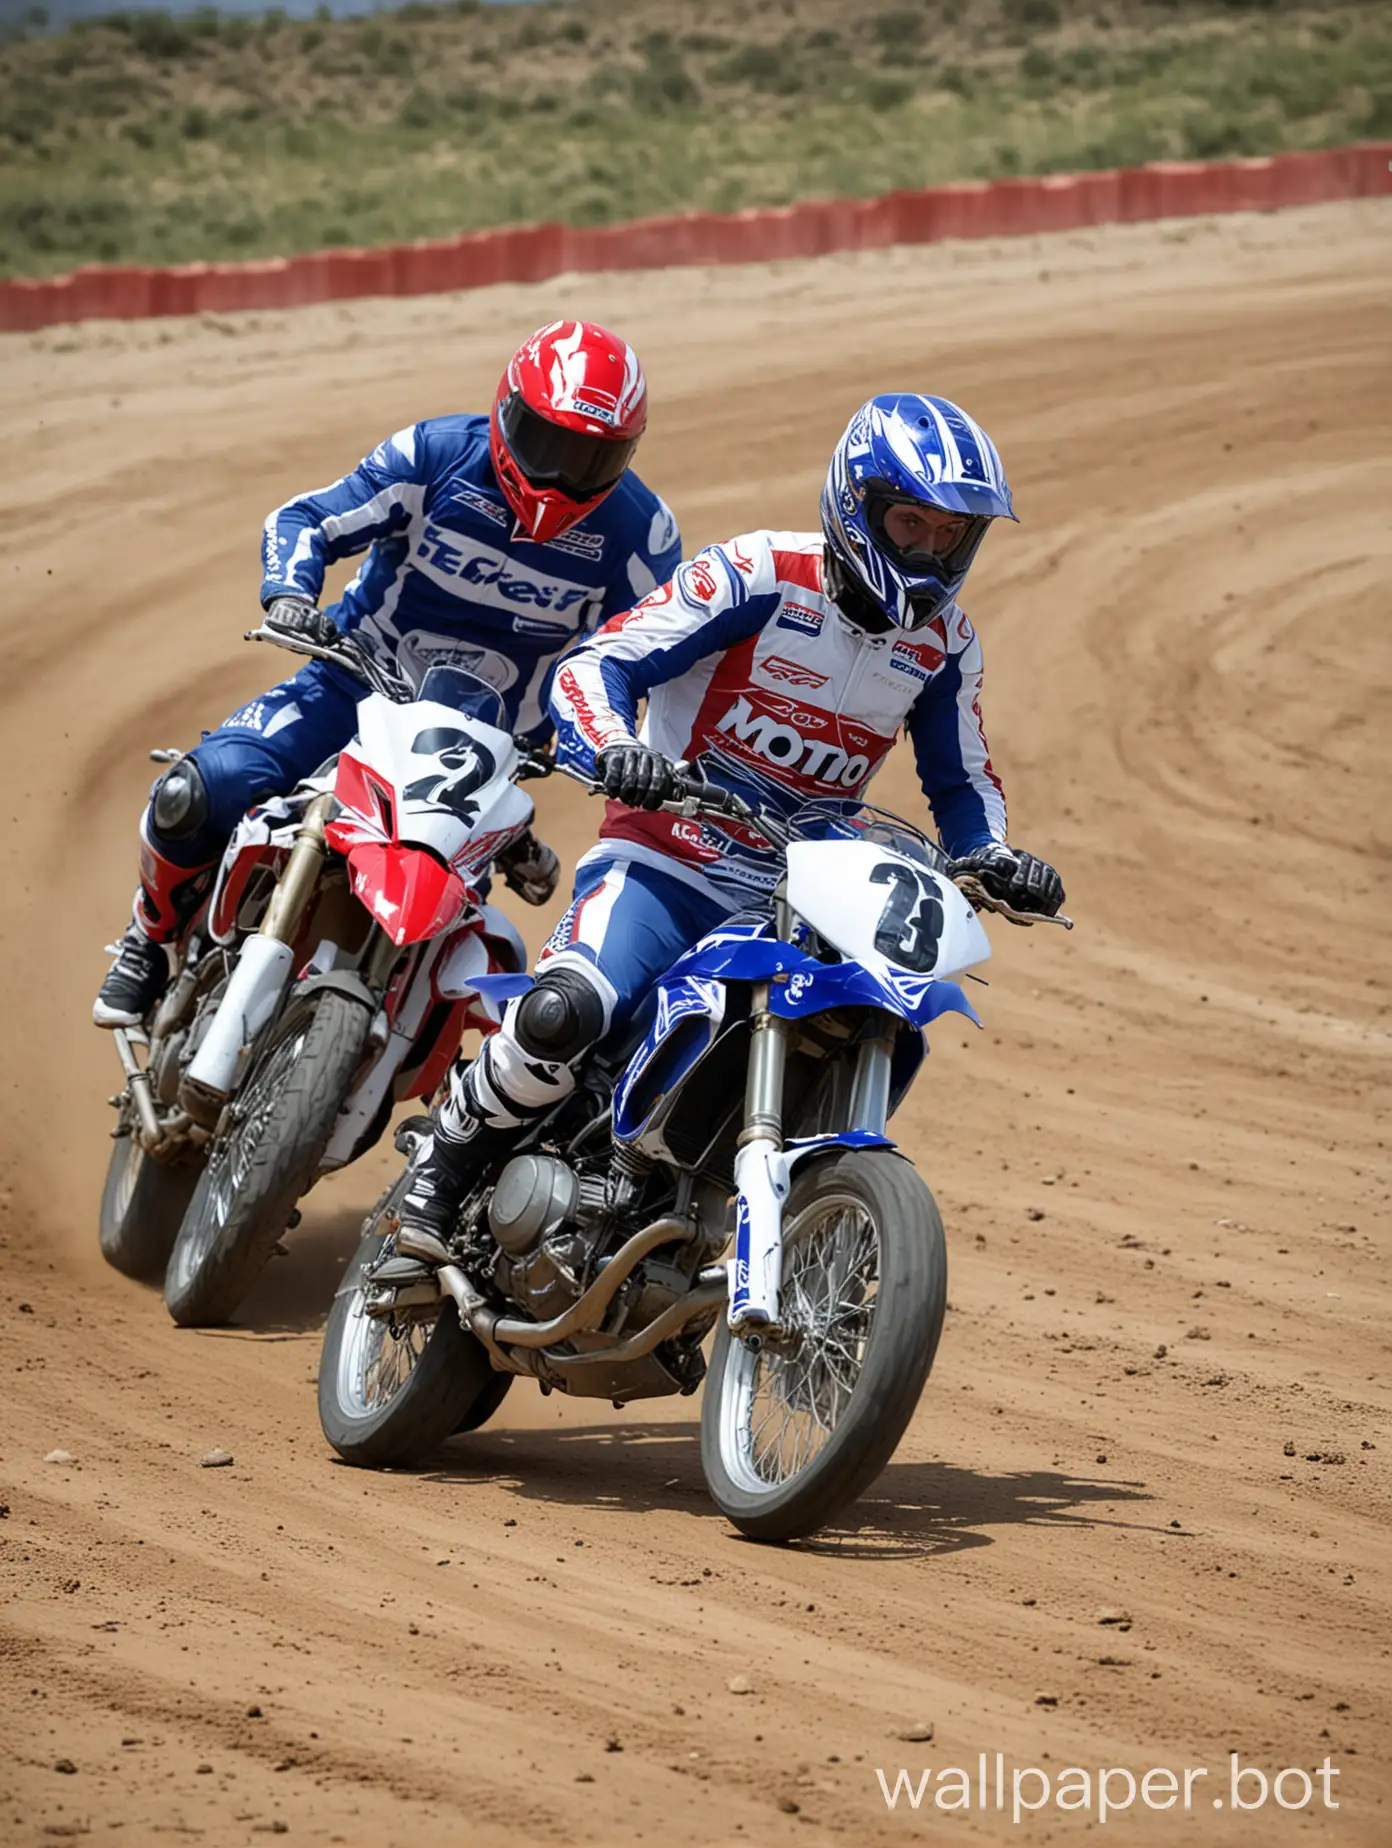 Intense-Moto-Race-Two-Bikers-Speeding-in-Blue-White-Red-and-White